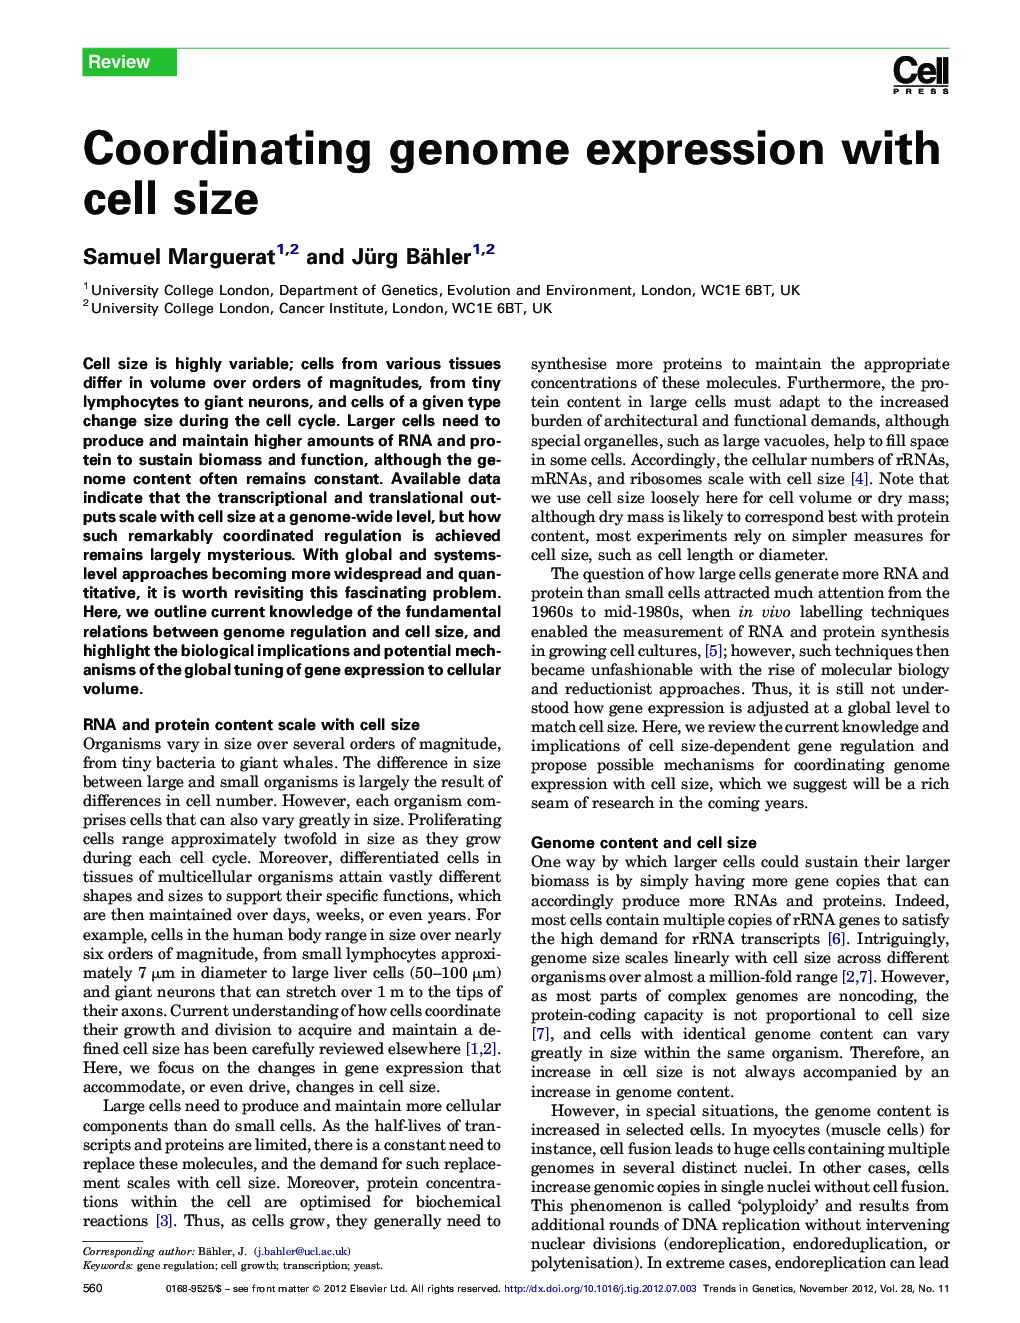 Coordinating genome expression with cell size